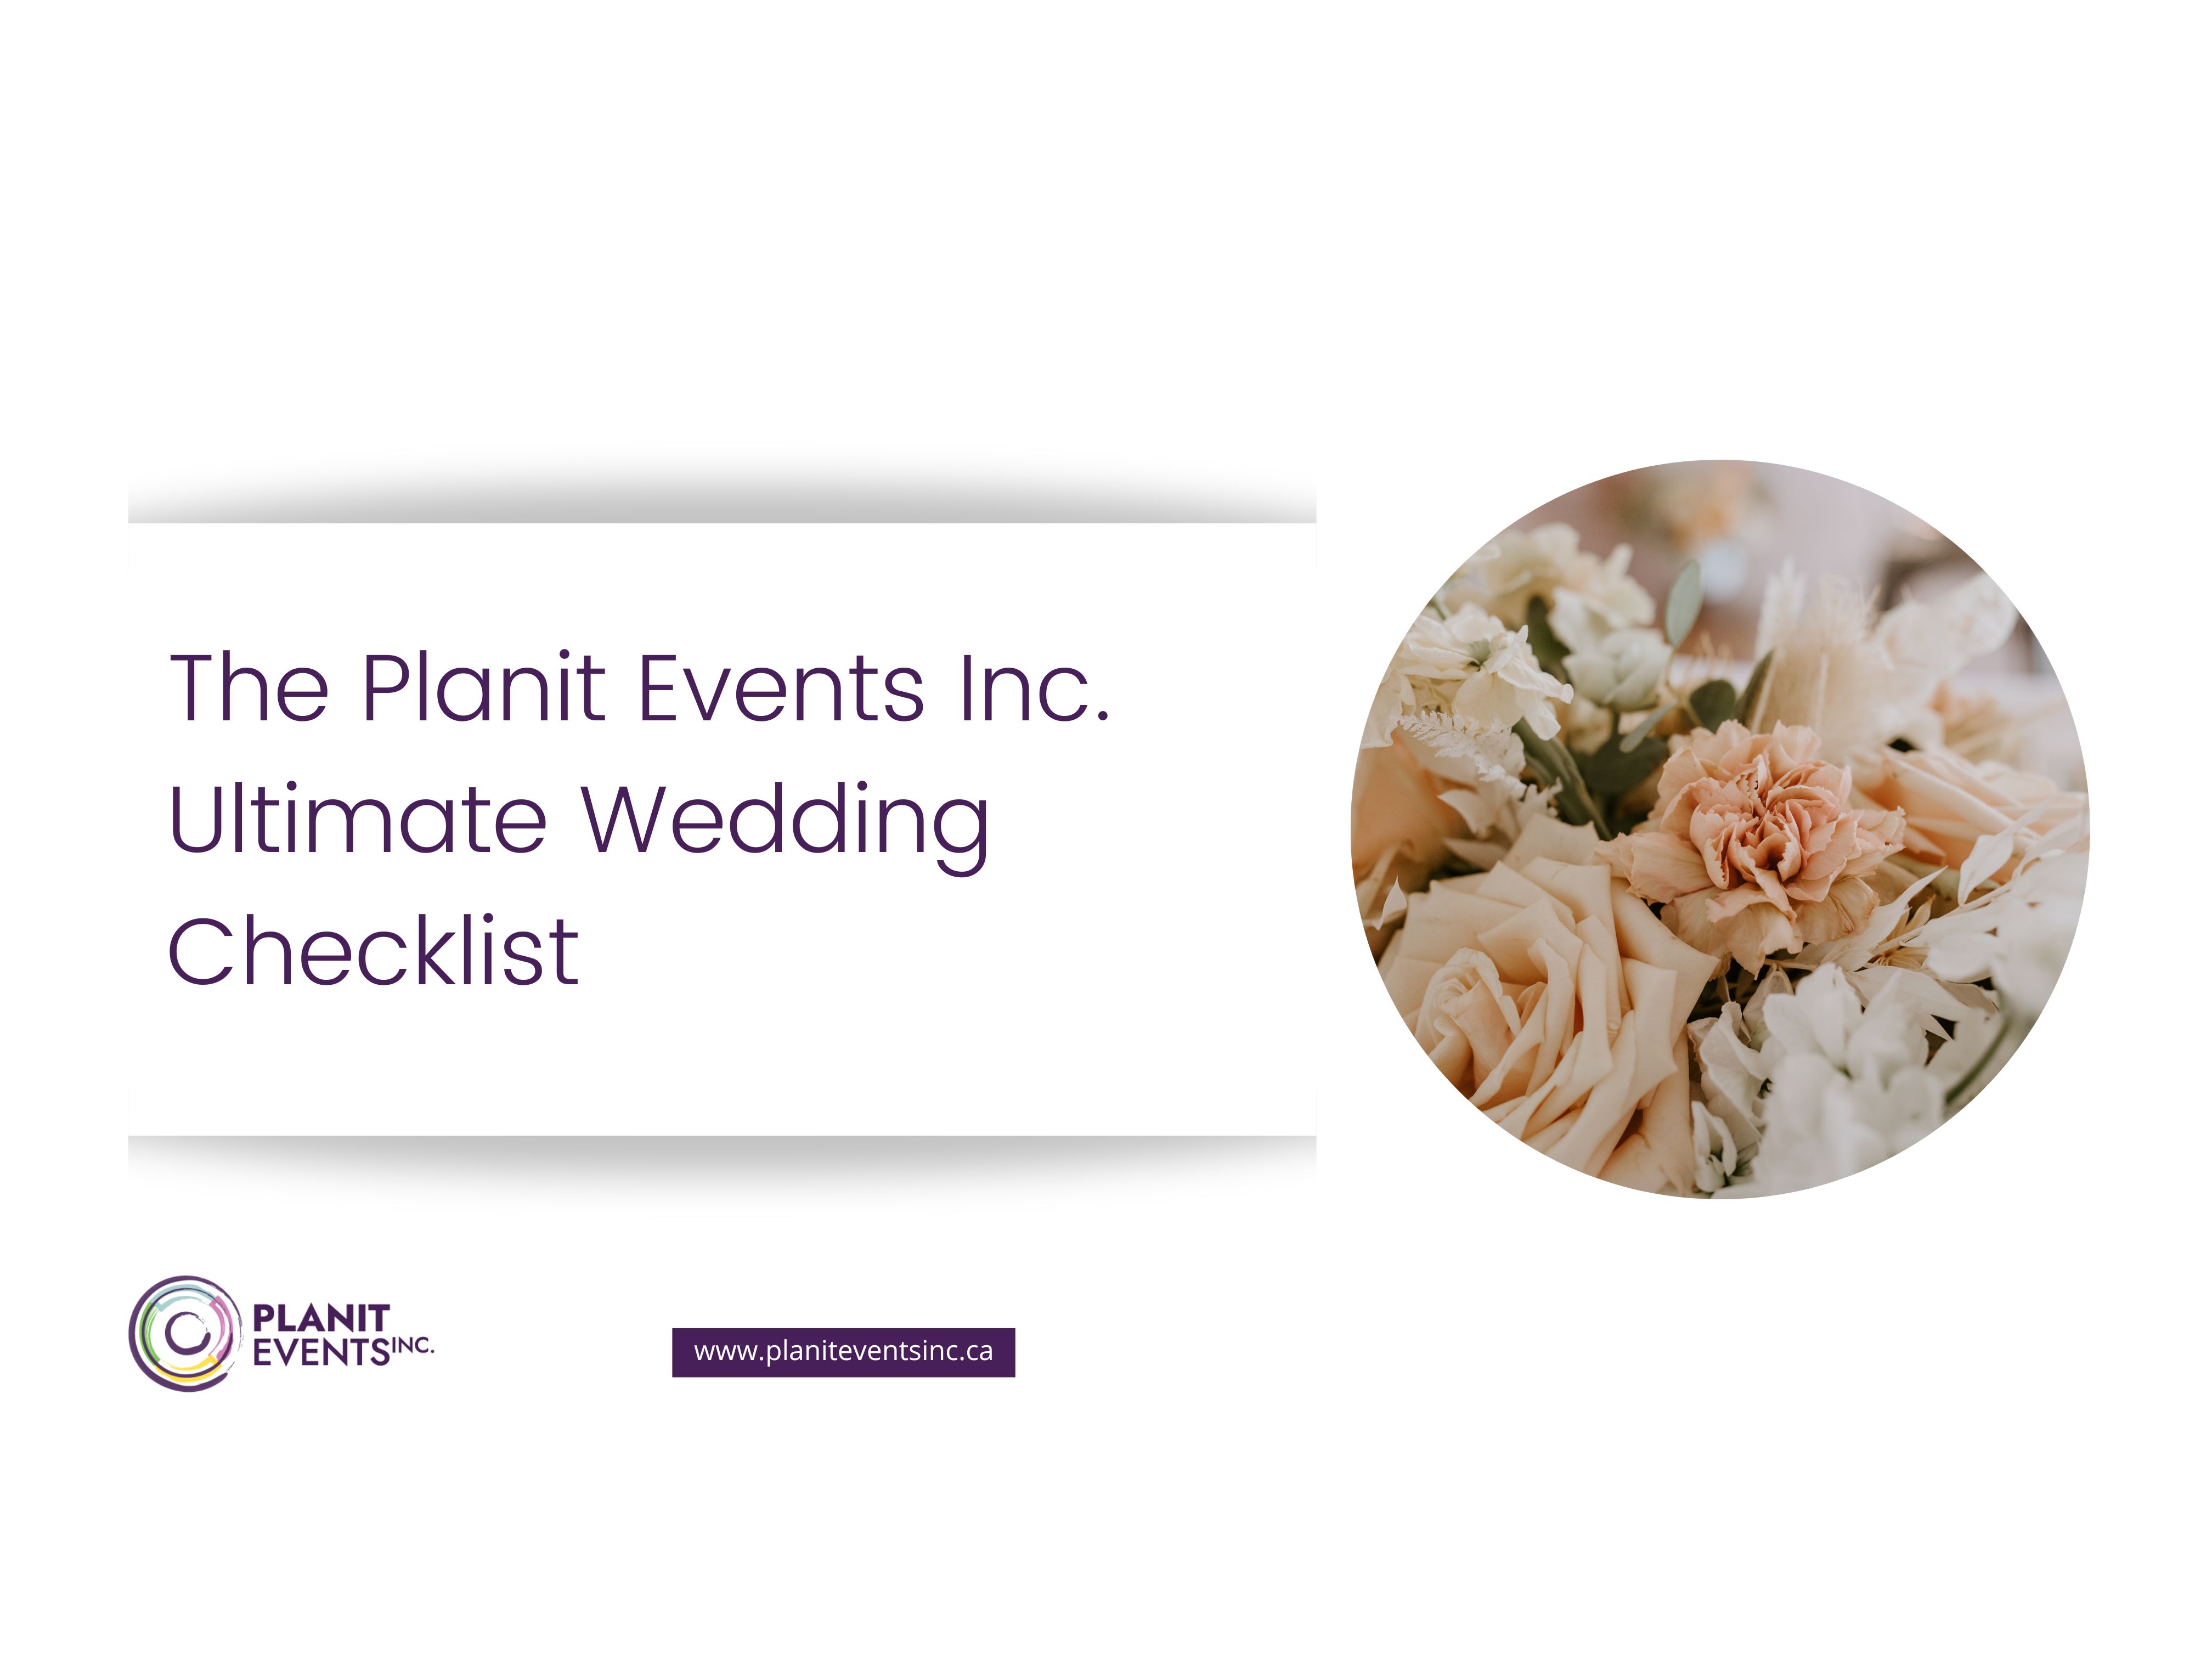 The Planit Events Inc. Ultimate Wedding Checklist